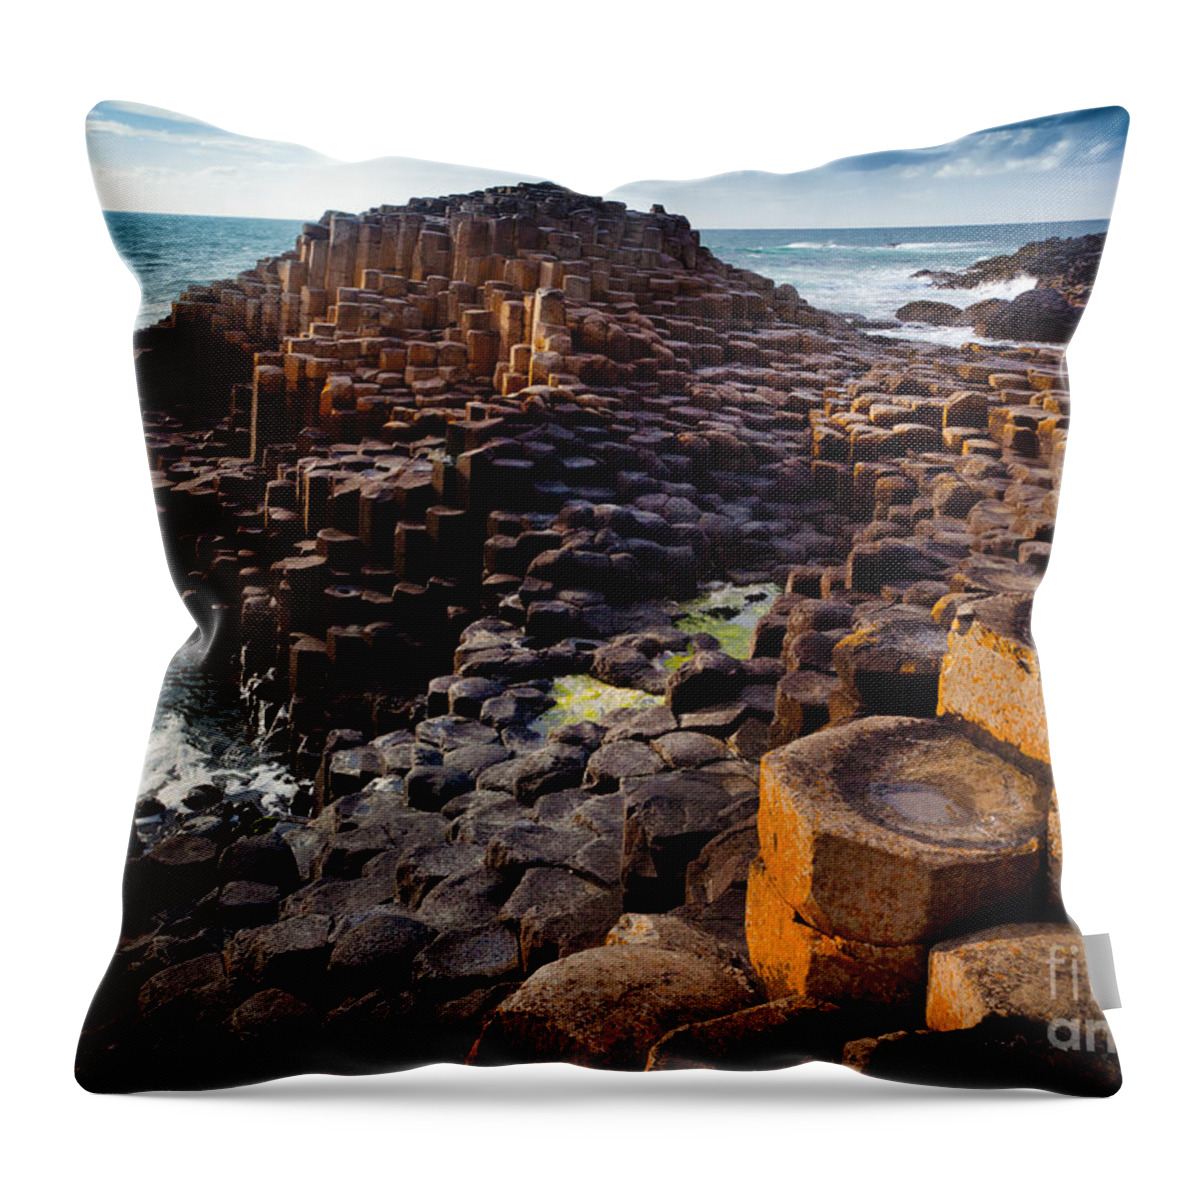 Europe Throw Pillow featuring the photograph Rugged Giant's Causeway by Inge Johnsson